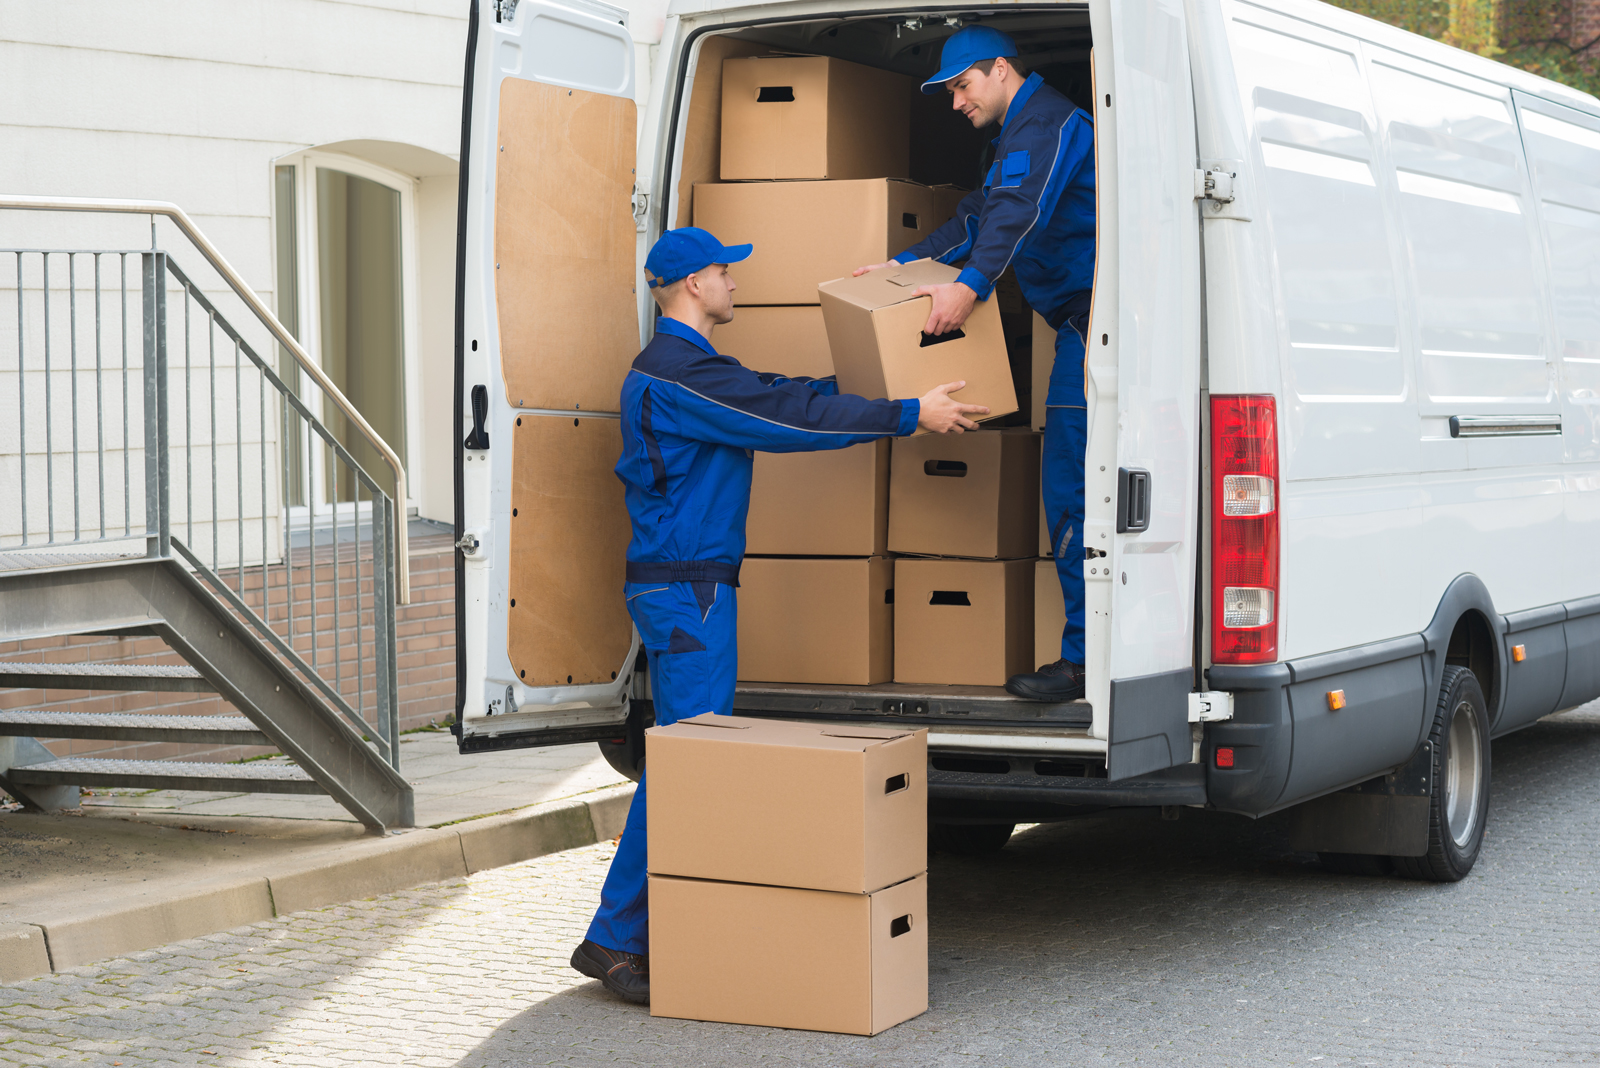 Two couriers unloading large boxes from the back of their van on a delivery